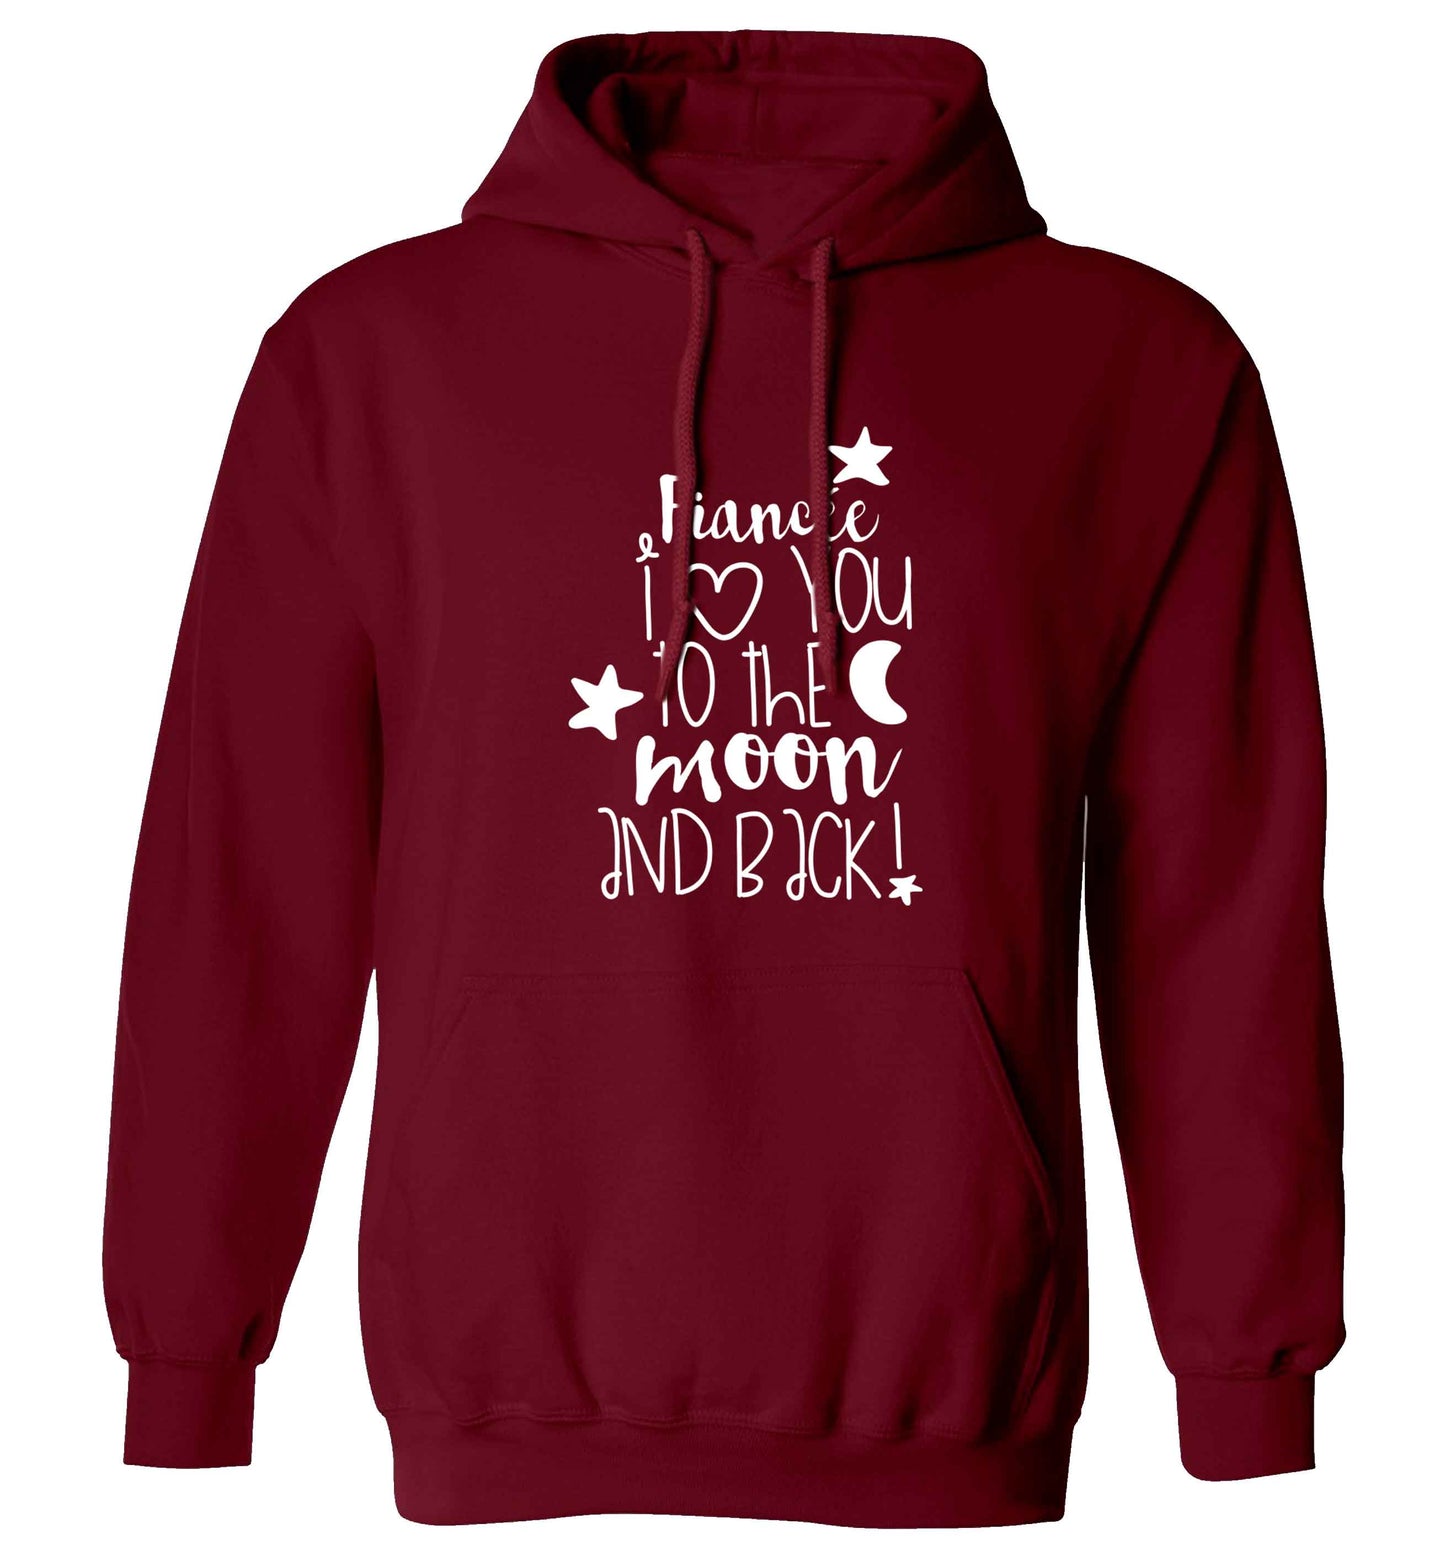 Fianc√©e I love you to the moon and back adults unisex maroon hoodie 2XL